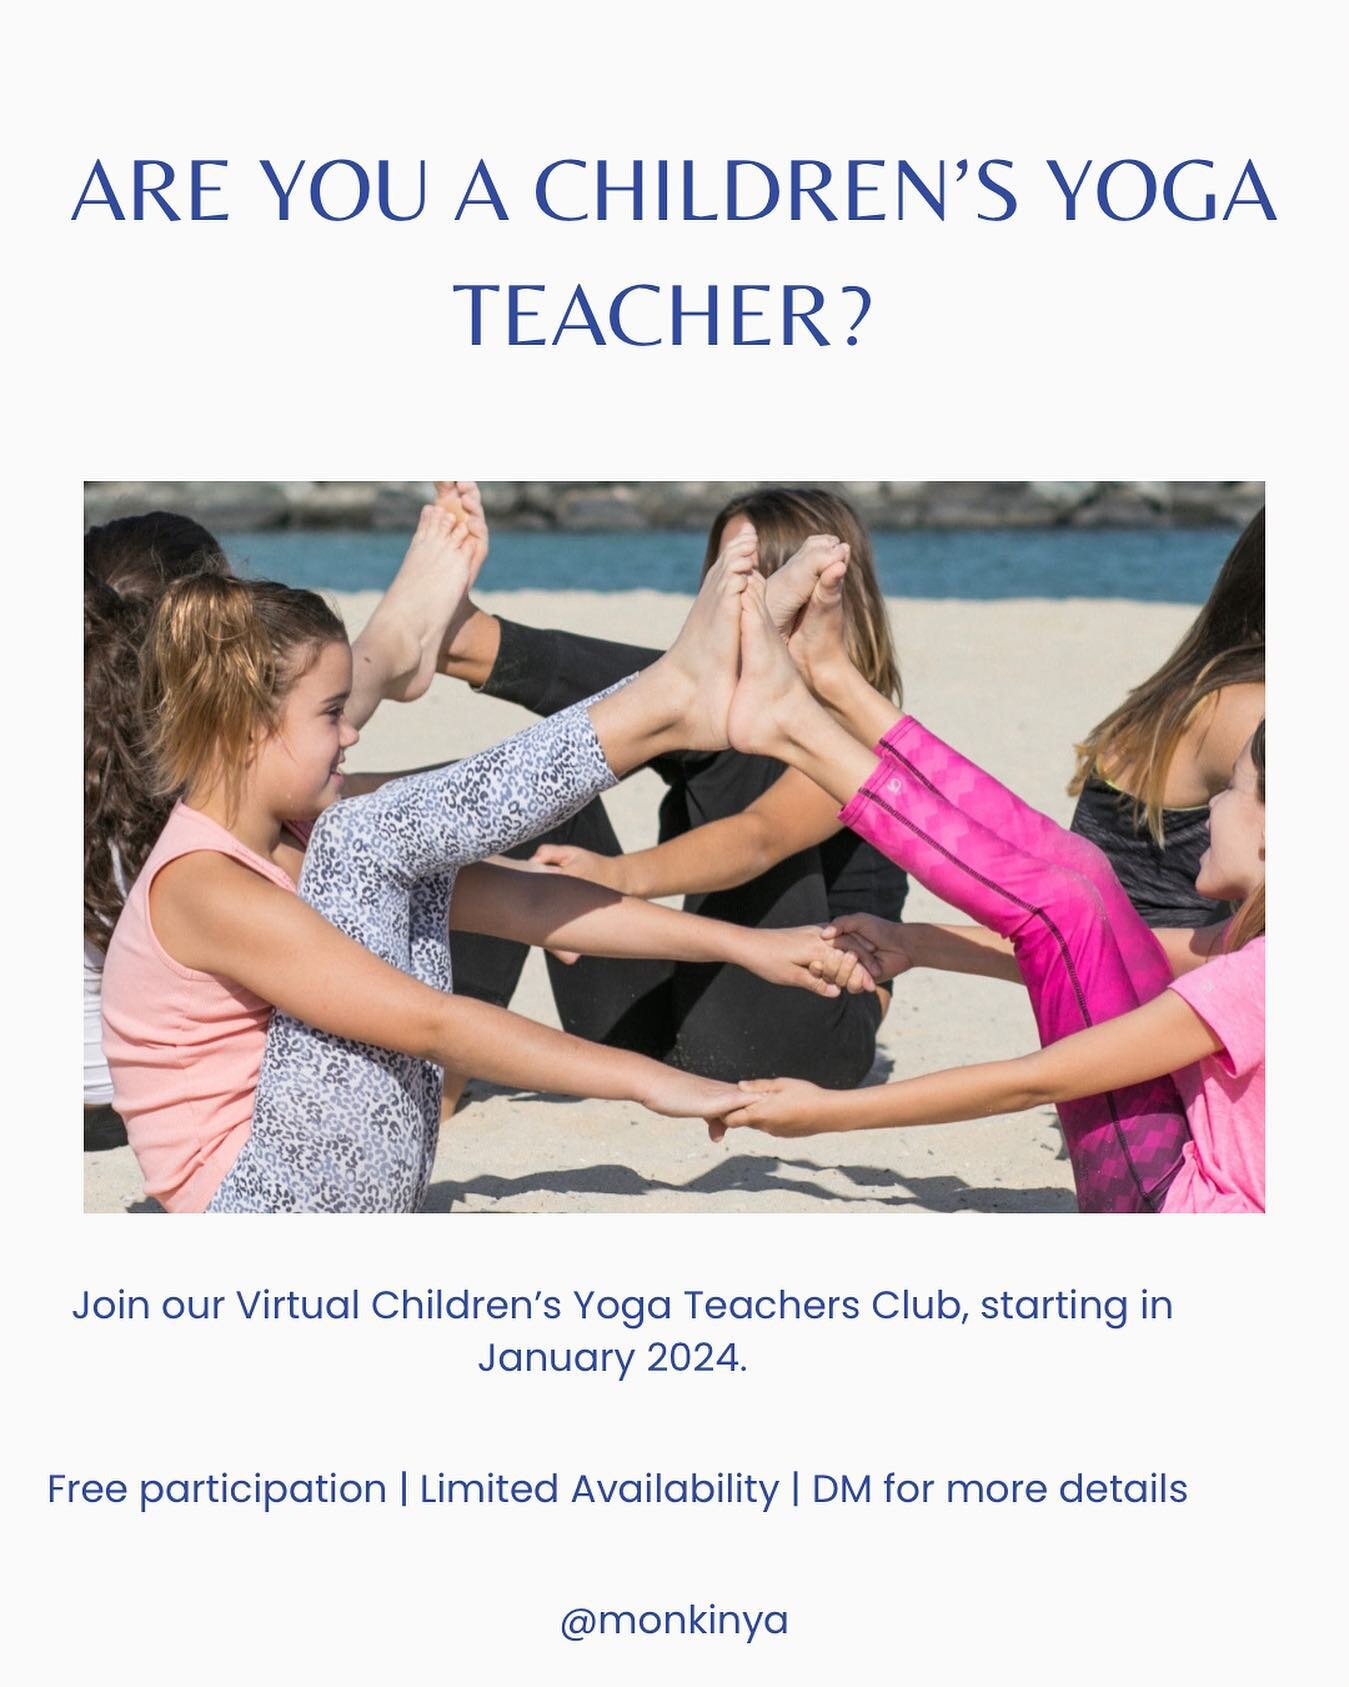 Monkinya focuses on creating a community for children&rsquo;s yoga teachers worldwide, where they can learn from each other, share best practices, and cherish their passion for touching children&rsquo;s lives through the magical power of yoga. Our te